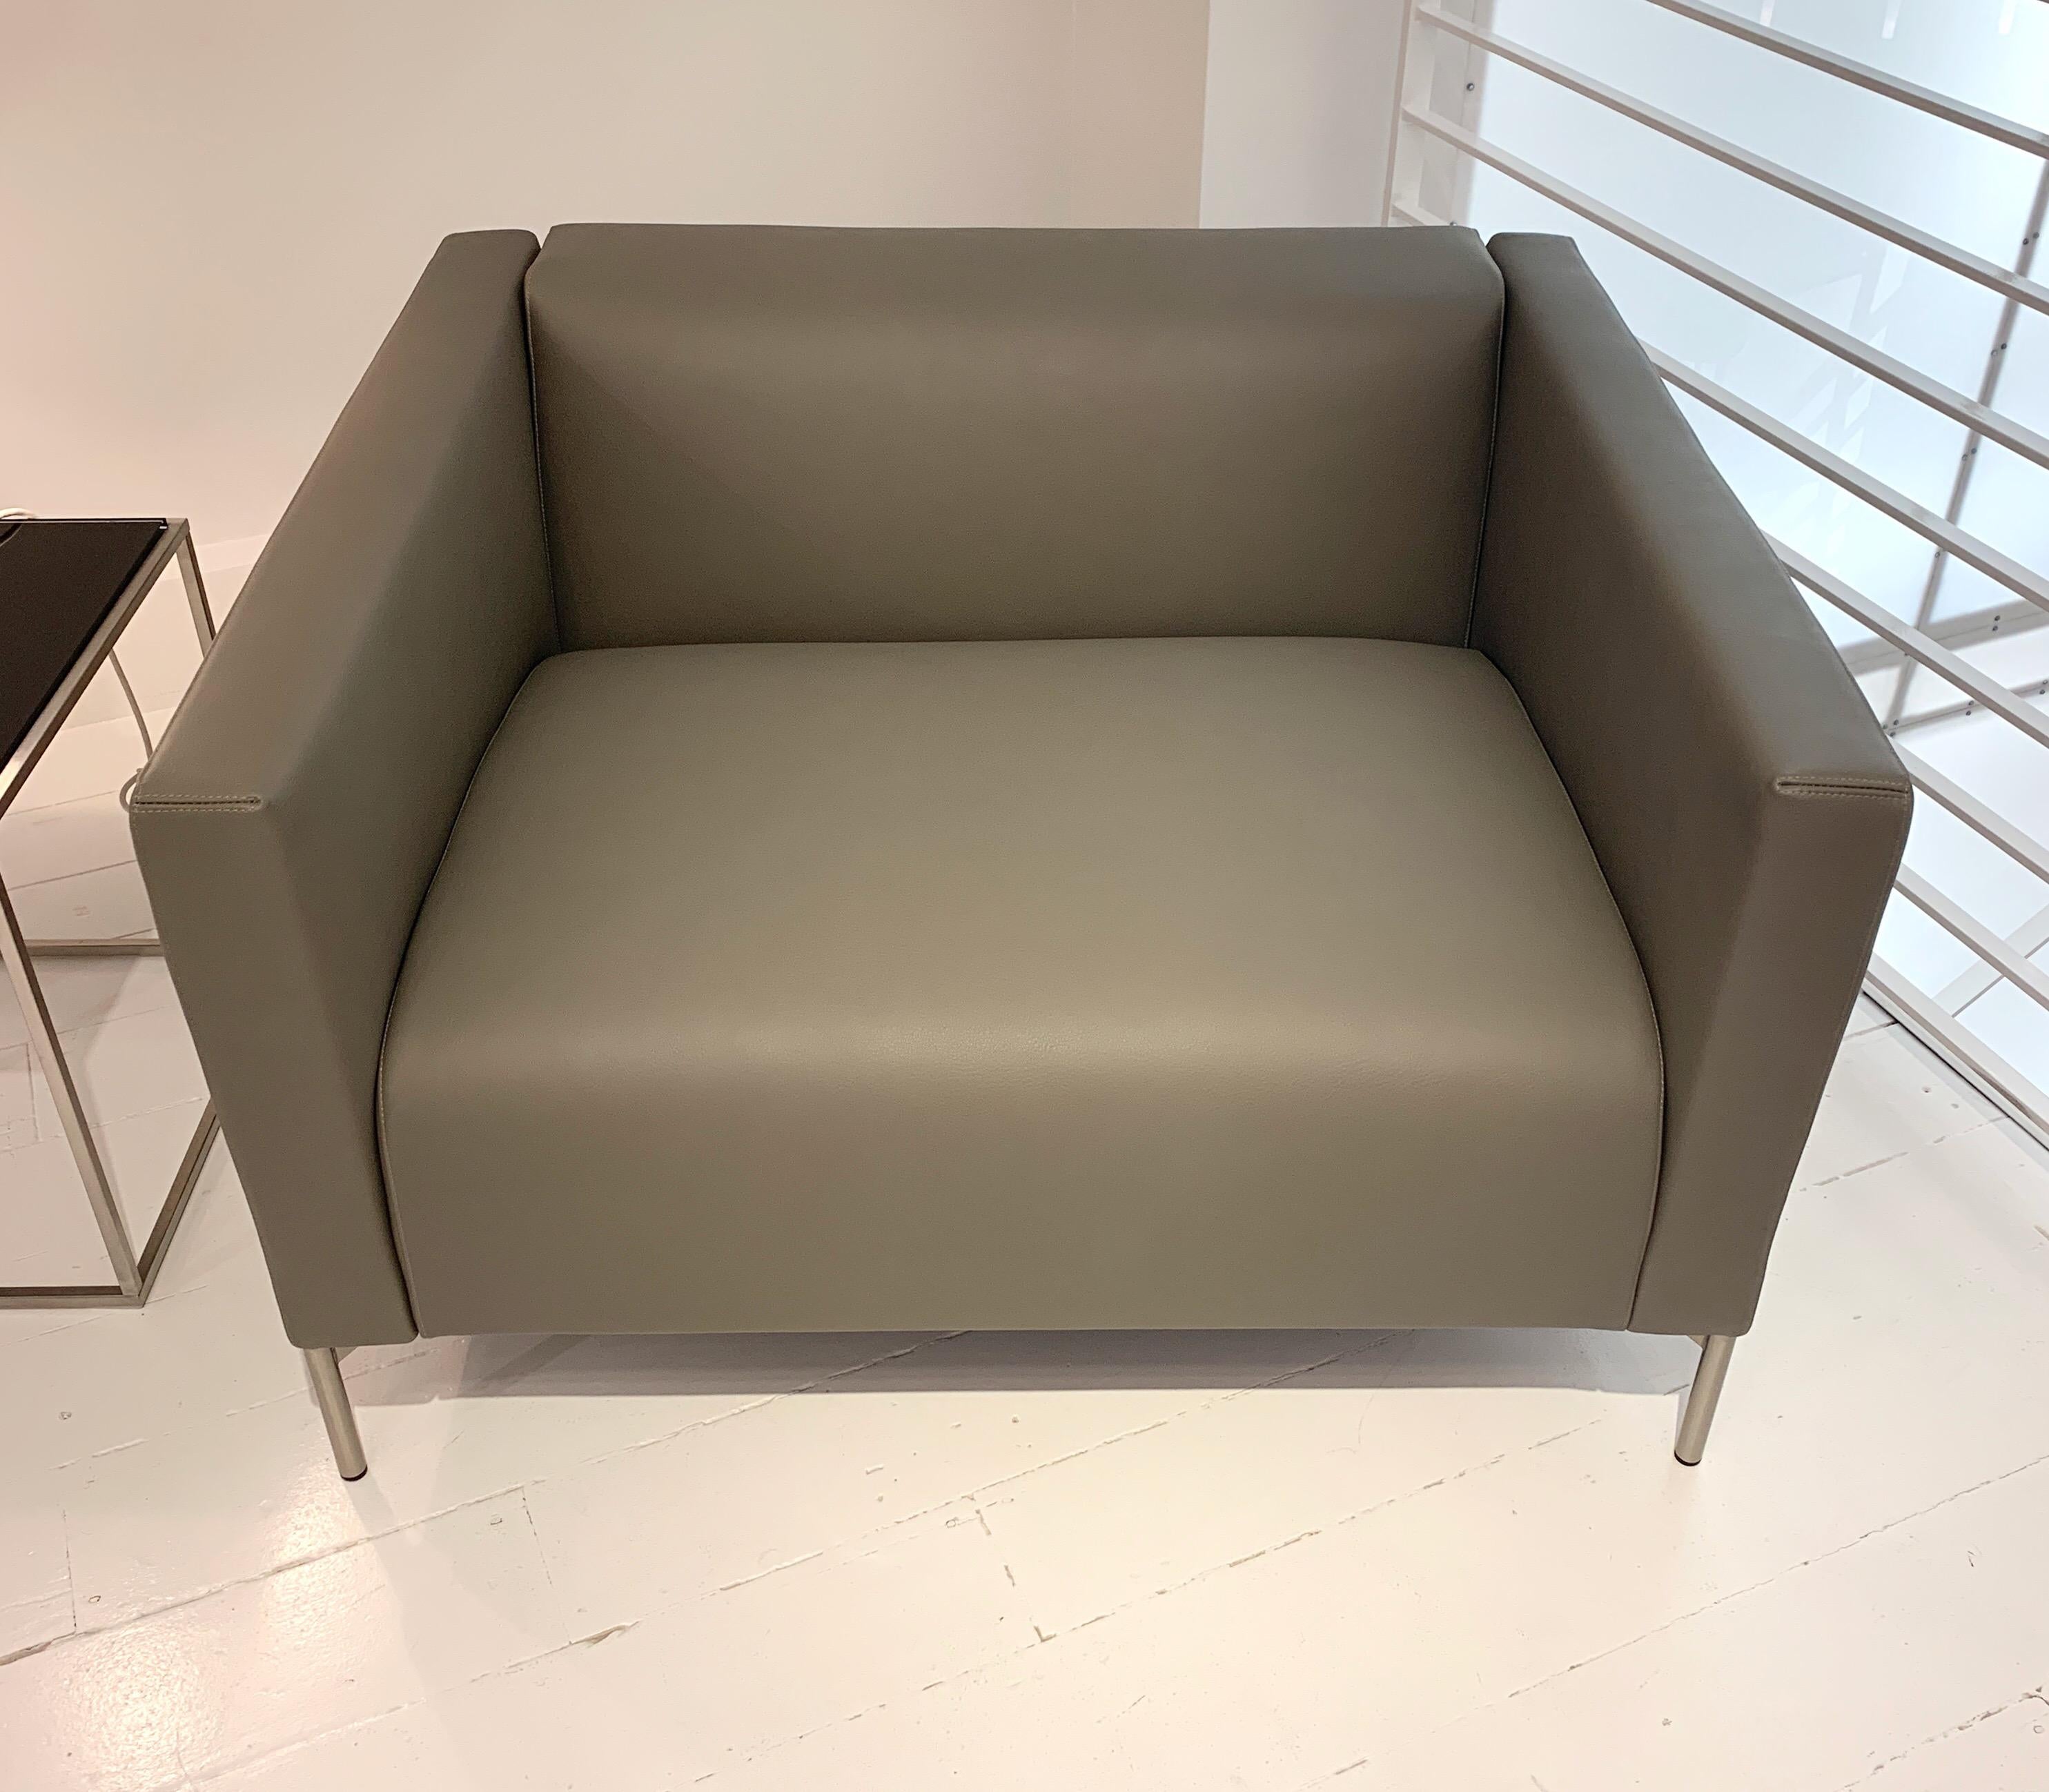 Designed by Piero Lissoni in 2001, this Twin armchair was made in 2018 in gray leather. Like-new condition.